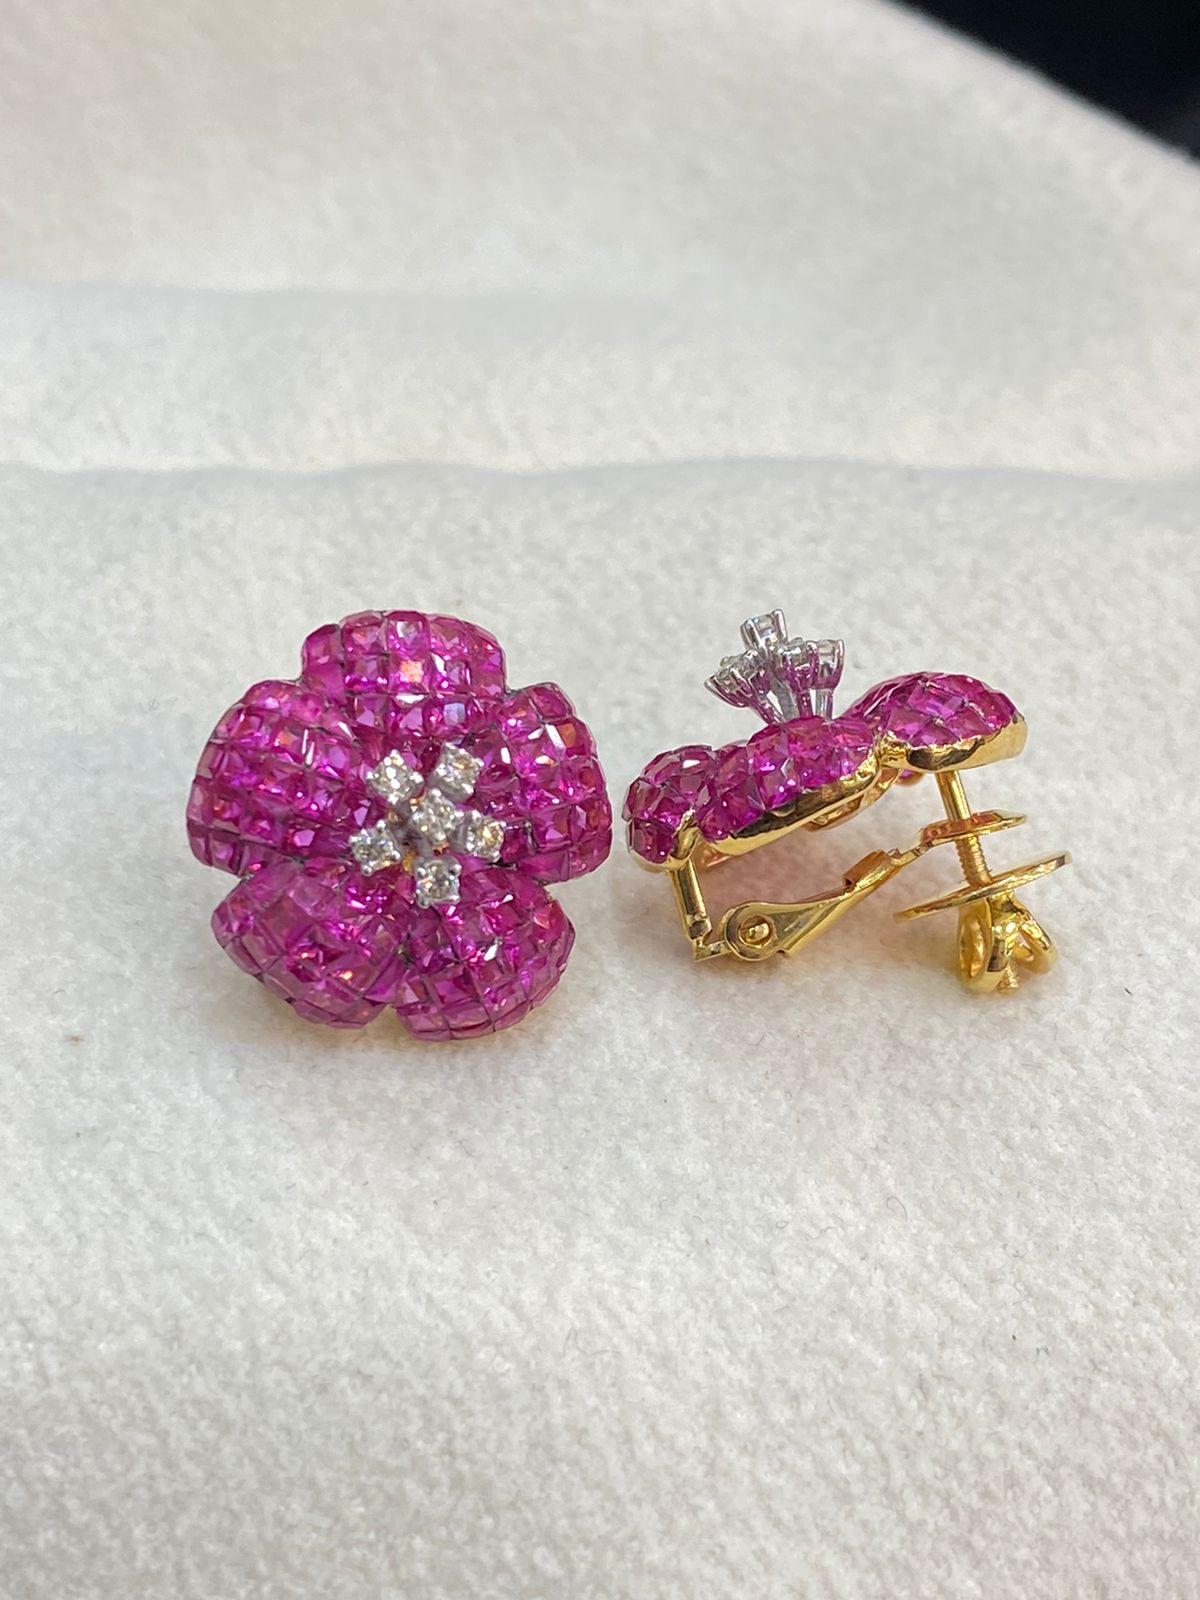 Brilliant Cut 9.86 Carats Natural Diamonds Princess Shape Ruby Floral Earrings 18K Yellow Gold For Sale